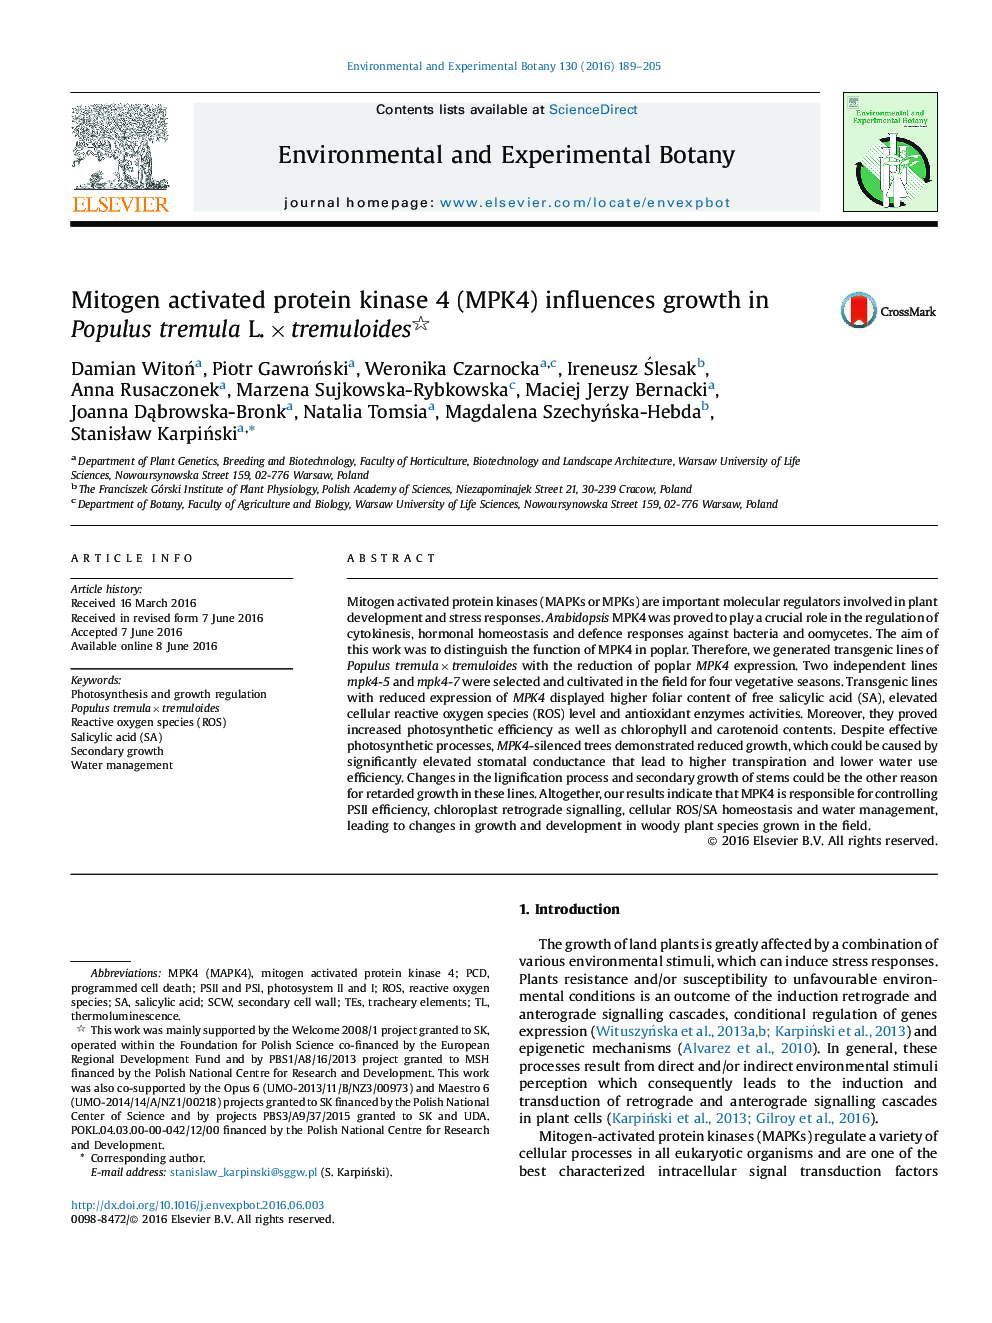 Mitogen activated protein kinase 4 (MPK4) influences growth in Populus tremula L. × tremuloides 